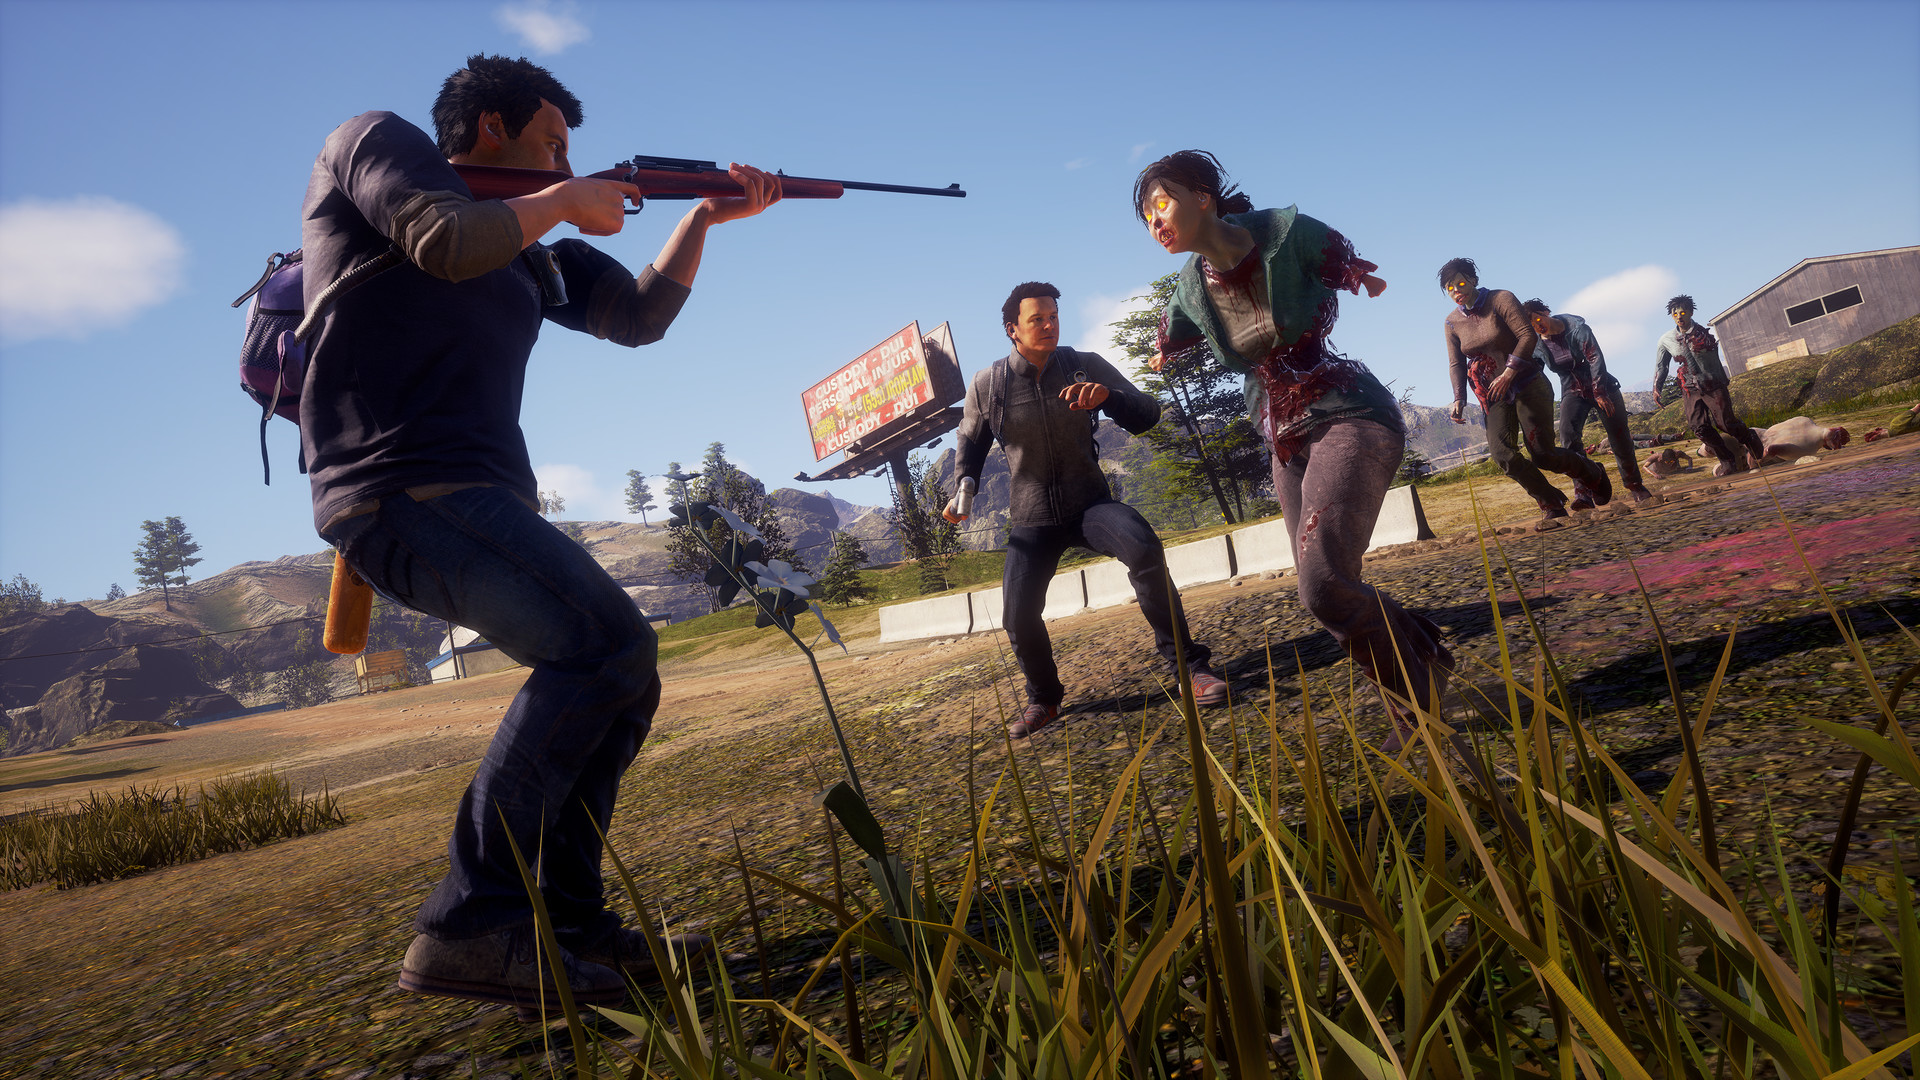 State of Decay 2: Juggernaut Edition no Steam